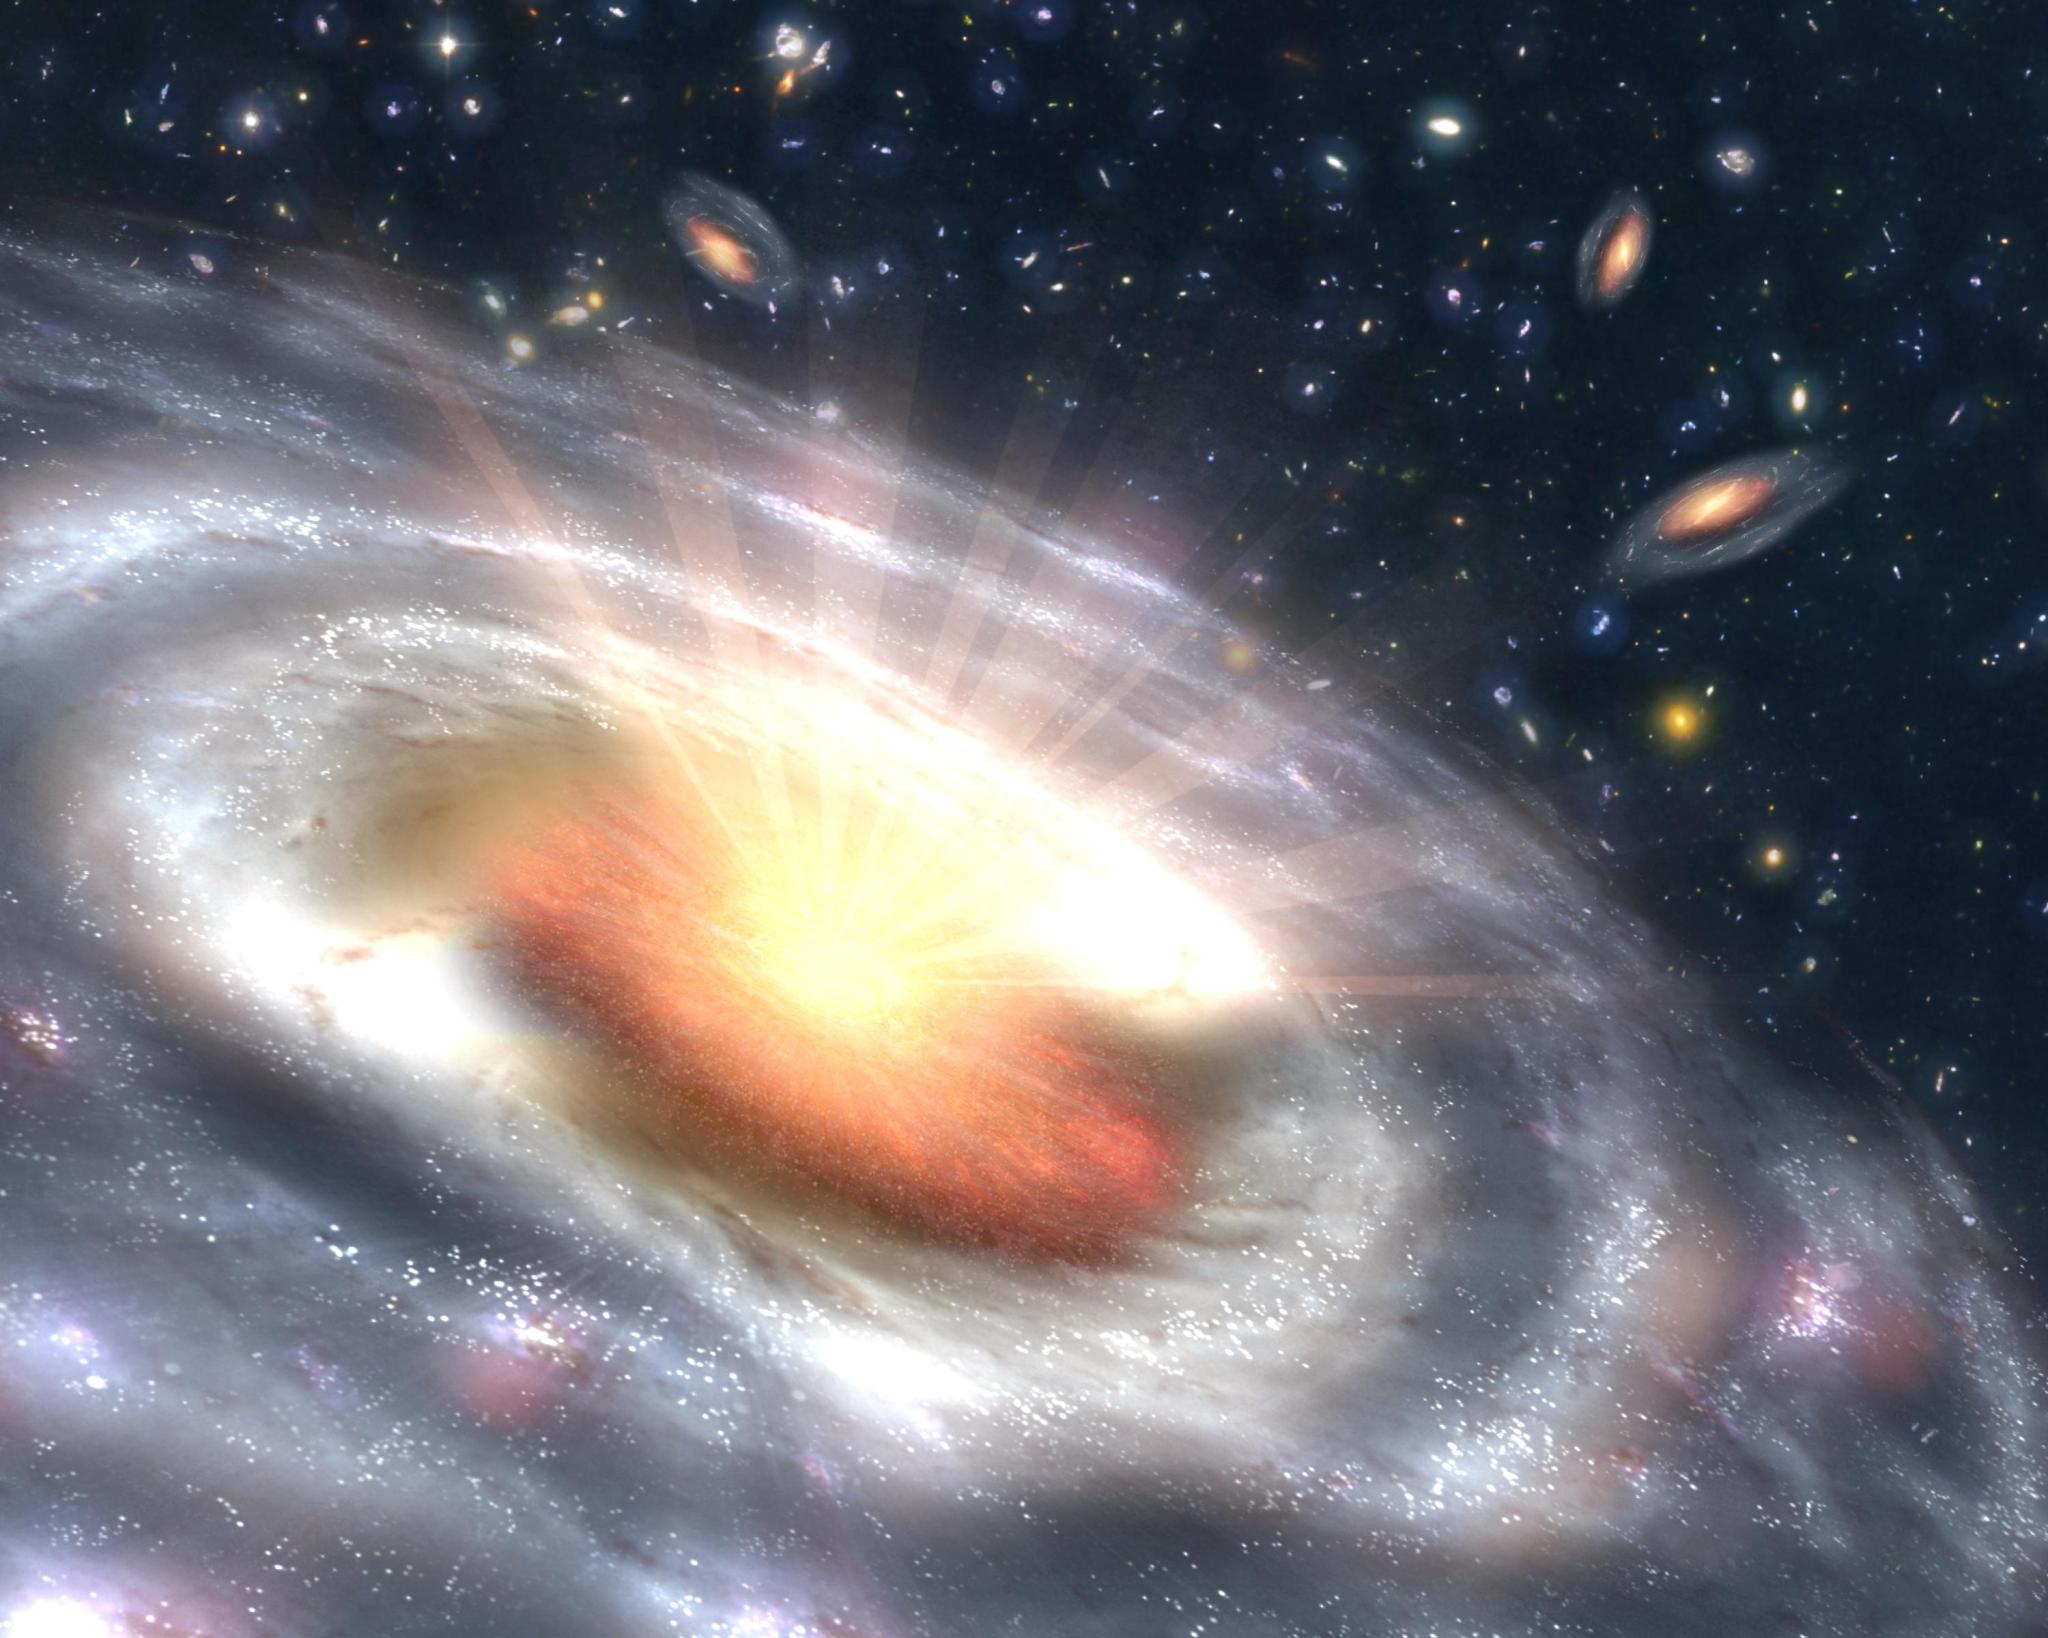 Artist concept of a growing black hole, or quasar, seen at the center of a faraway galaxy.